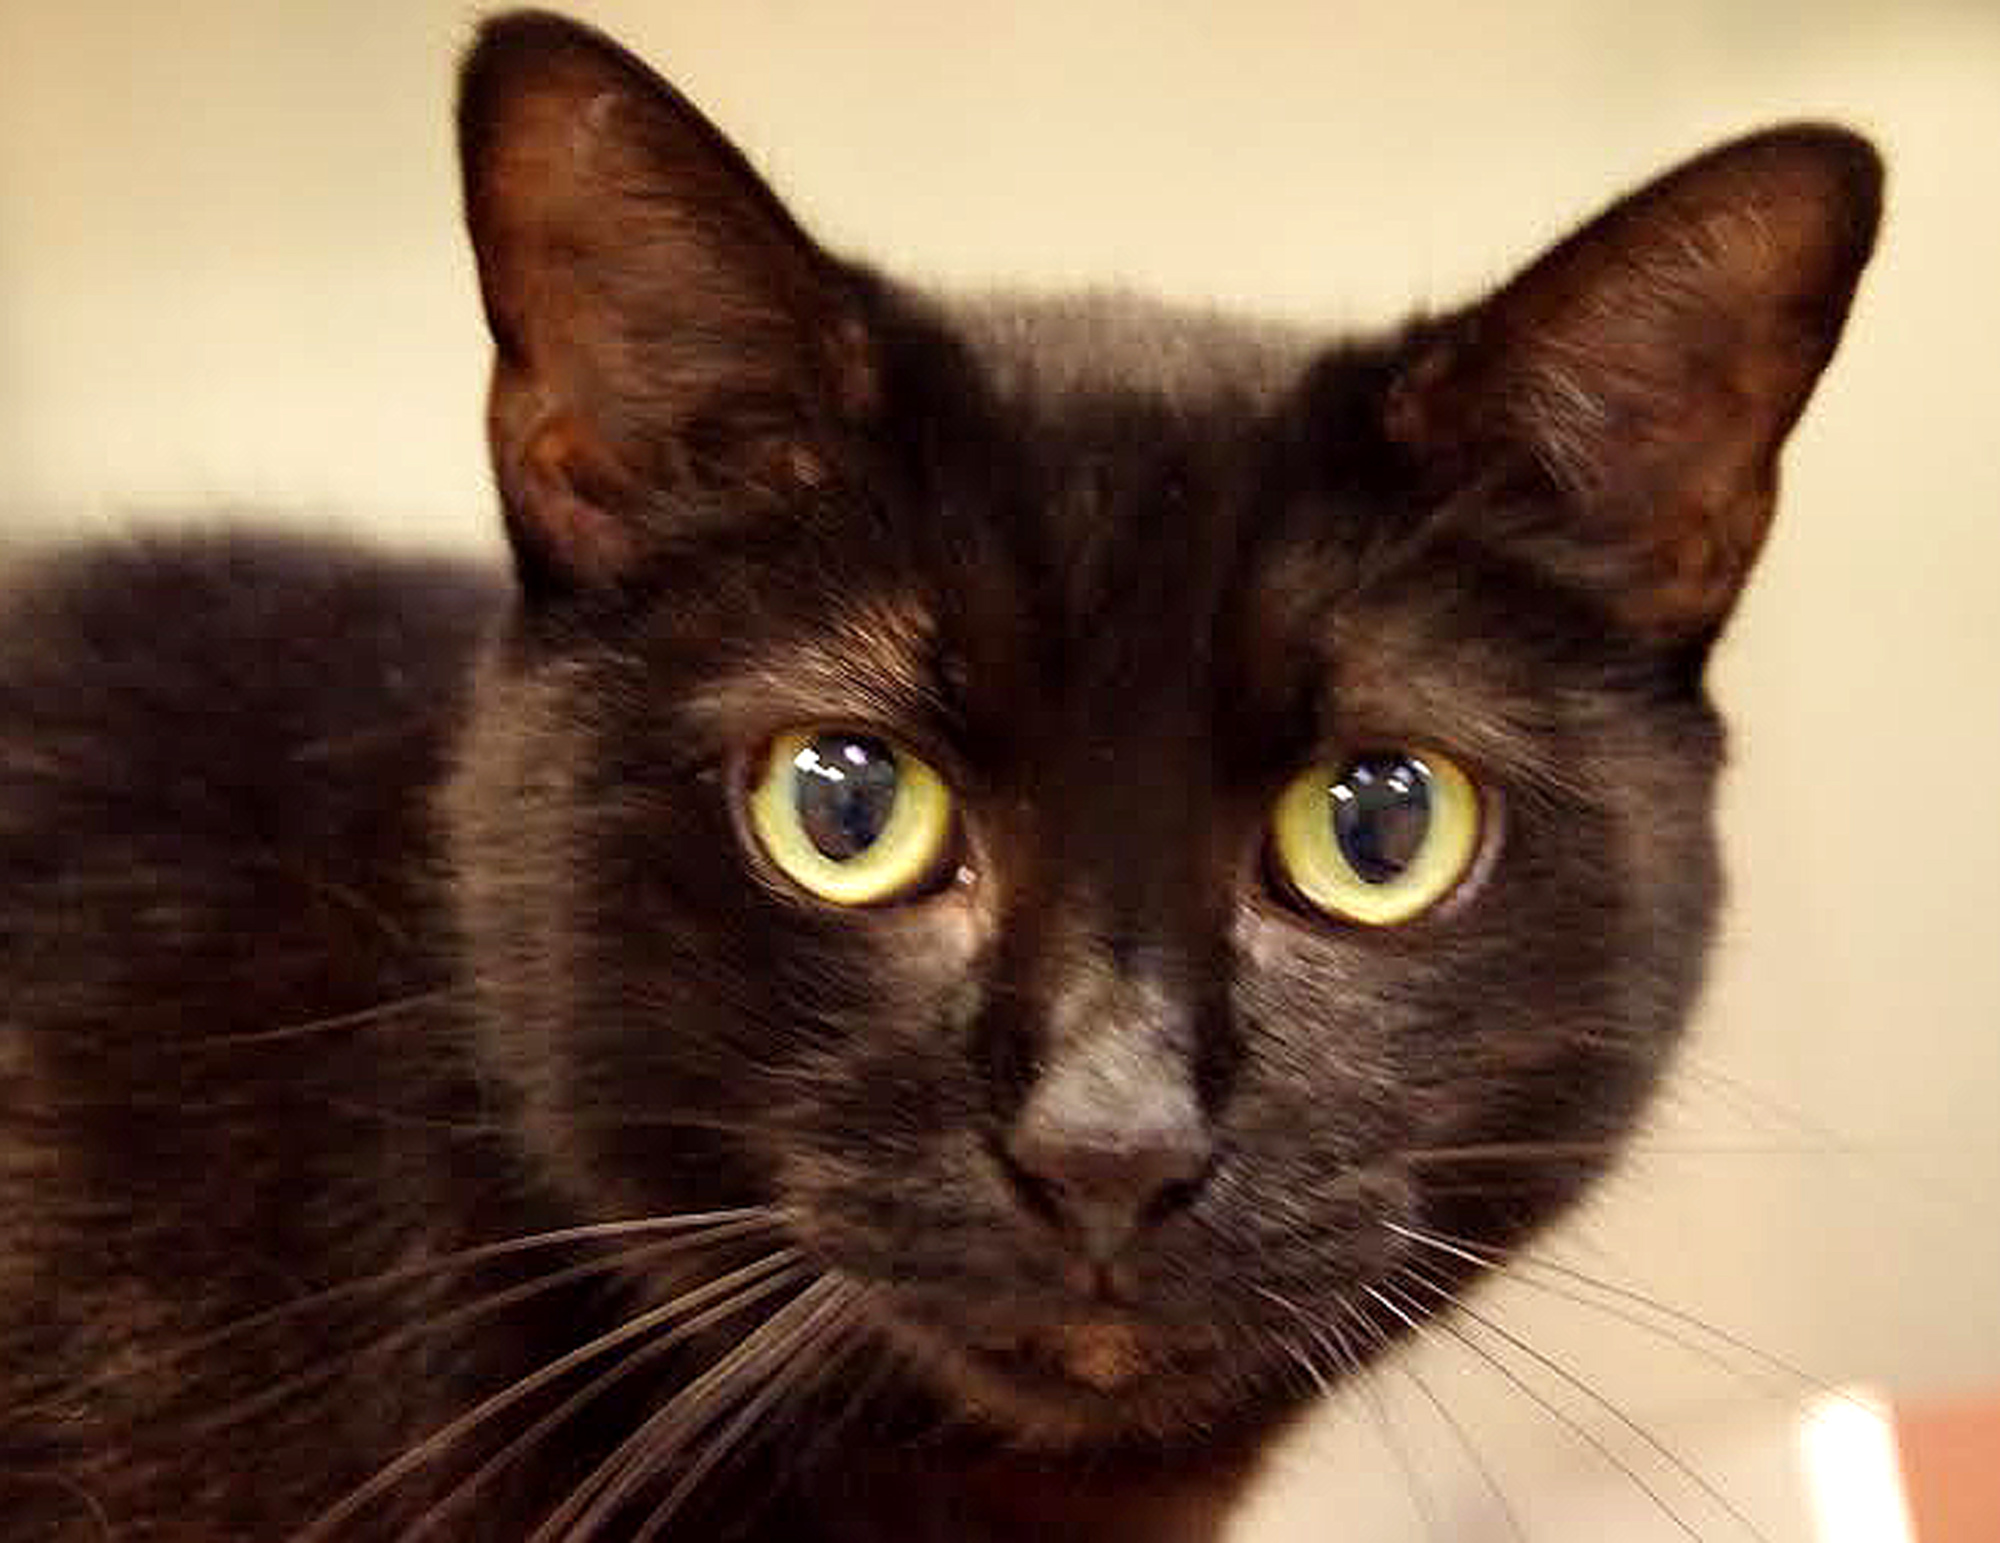 Ronda, 31269236, is a 5-year-old, female cat, available at Halifax Humane Society. Courtesy photo.